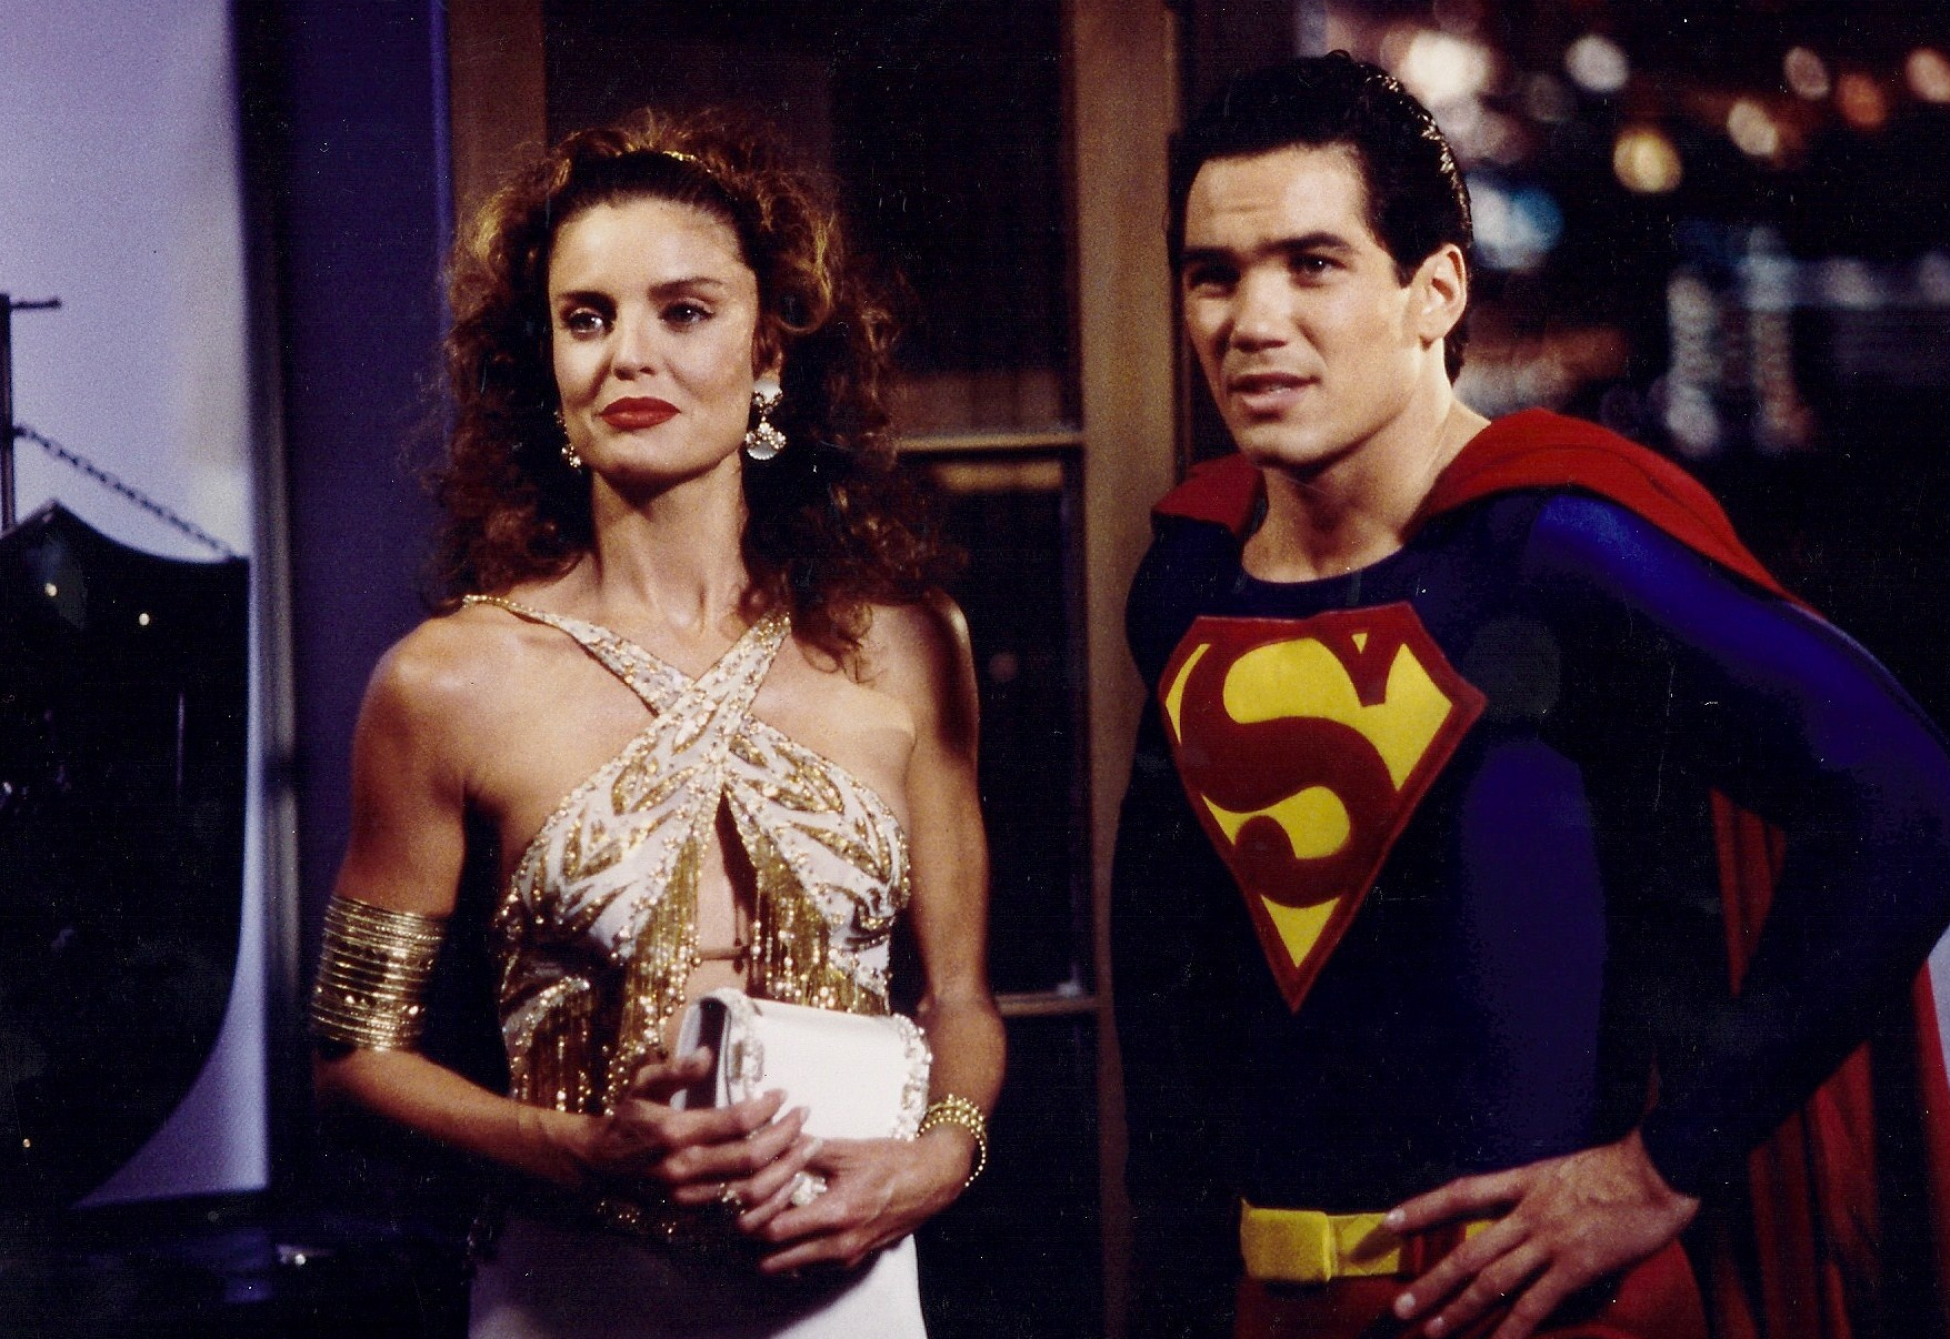 Lois and Clark: The New Adventures of Superman: A sci-fi television series about the adventures of DC Comics characters that aired from 1993 to 1997. 1950x1340 HD Wallpaper.